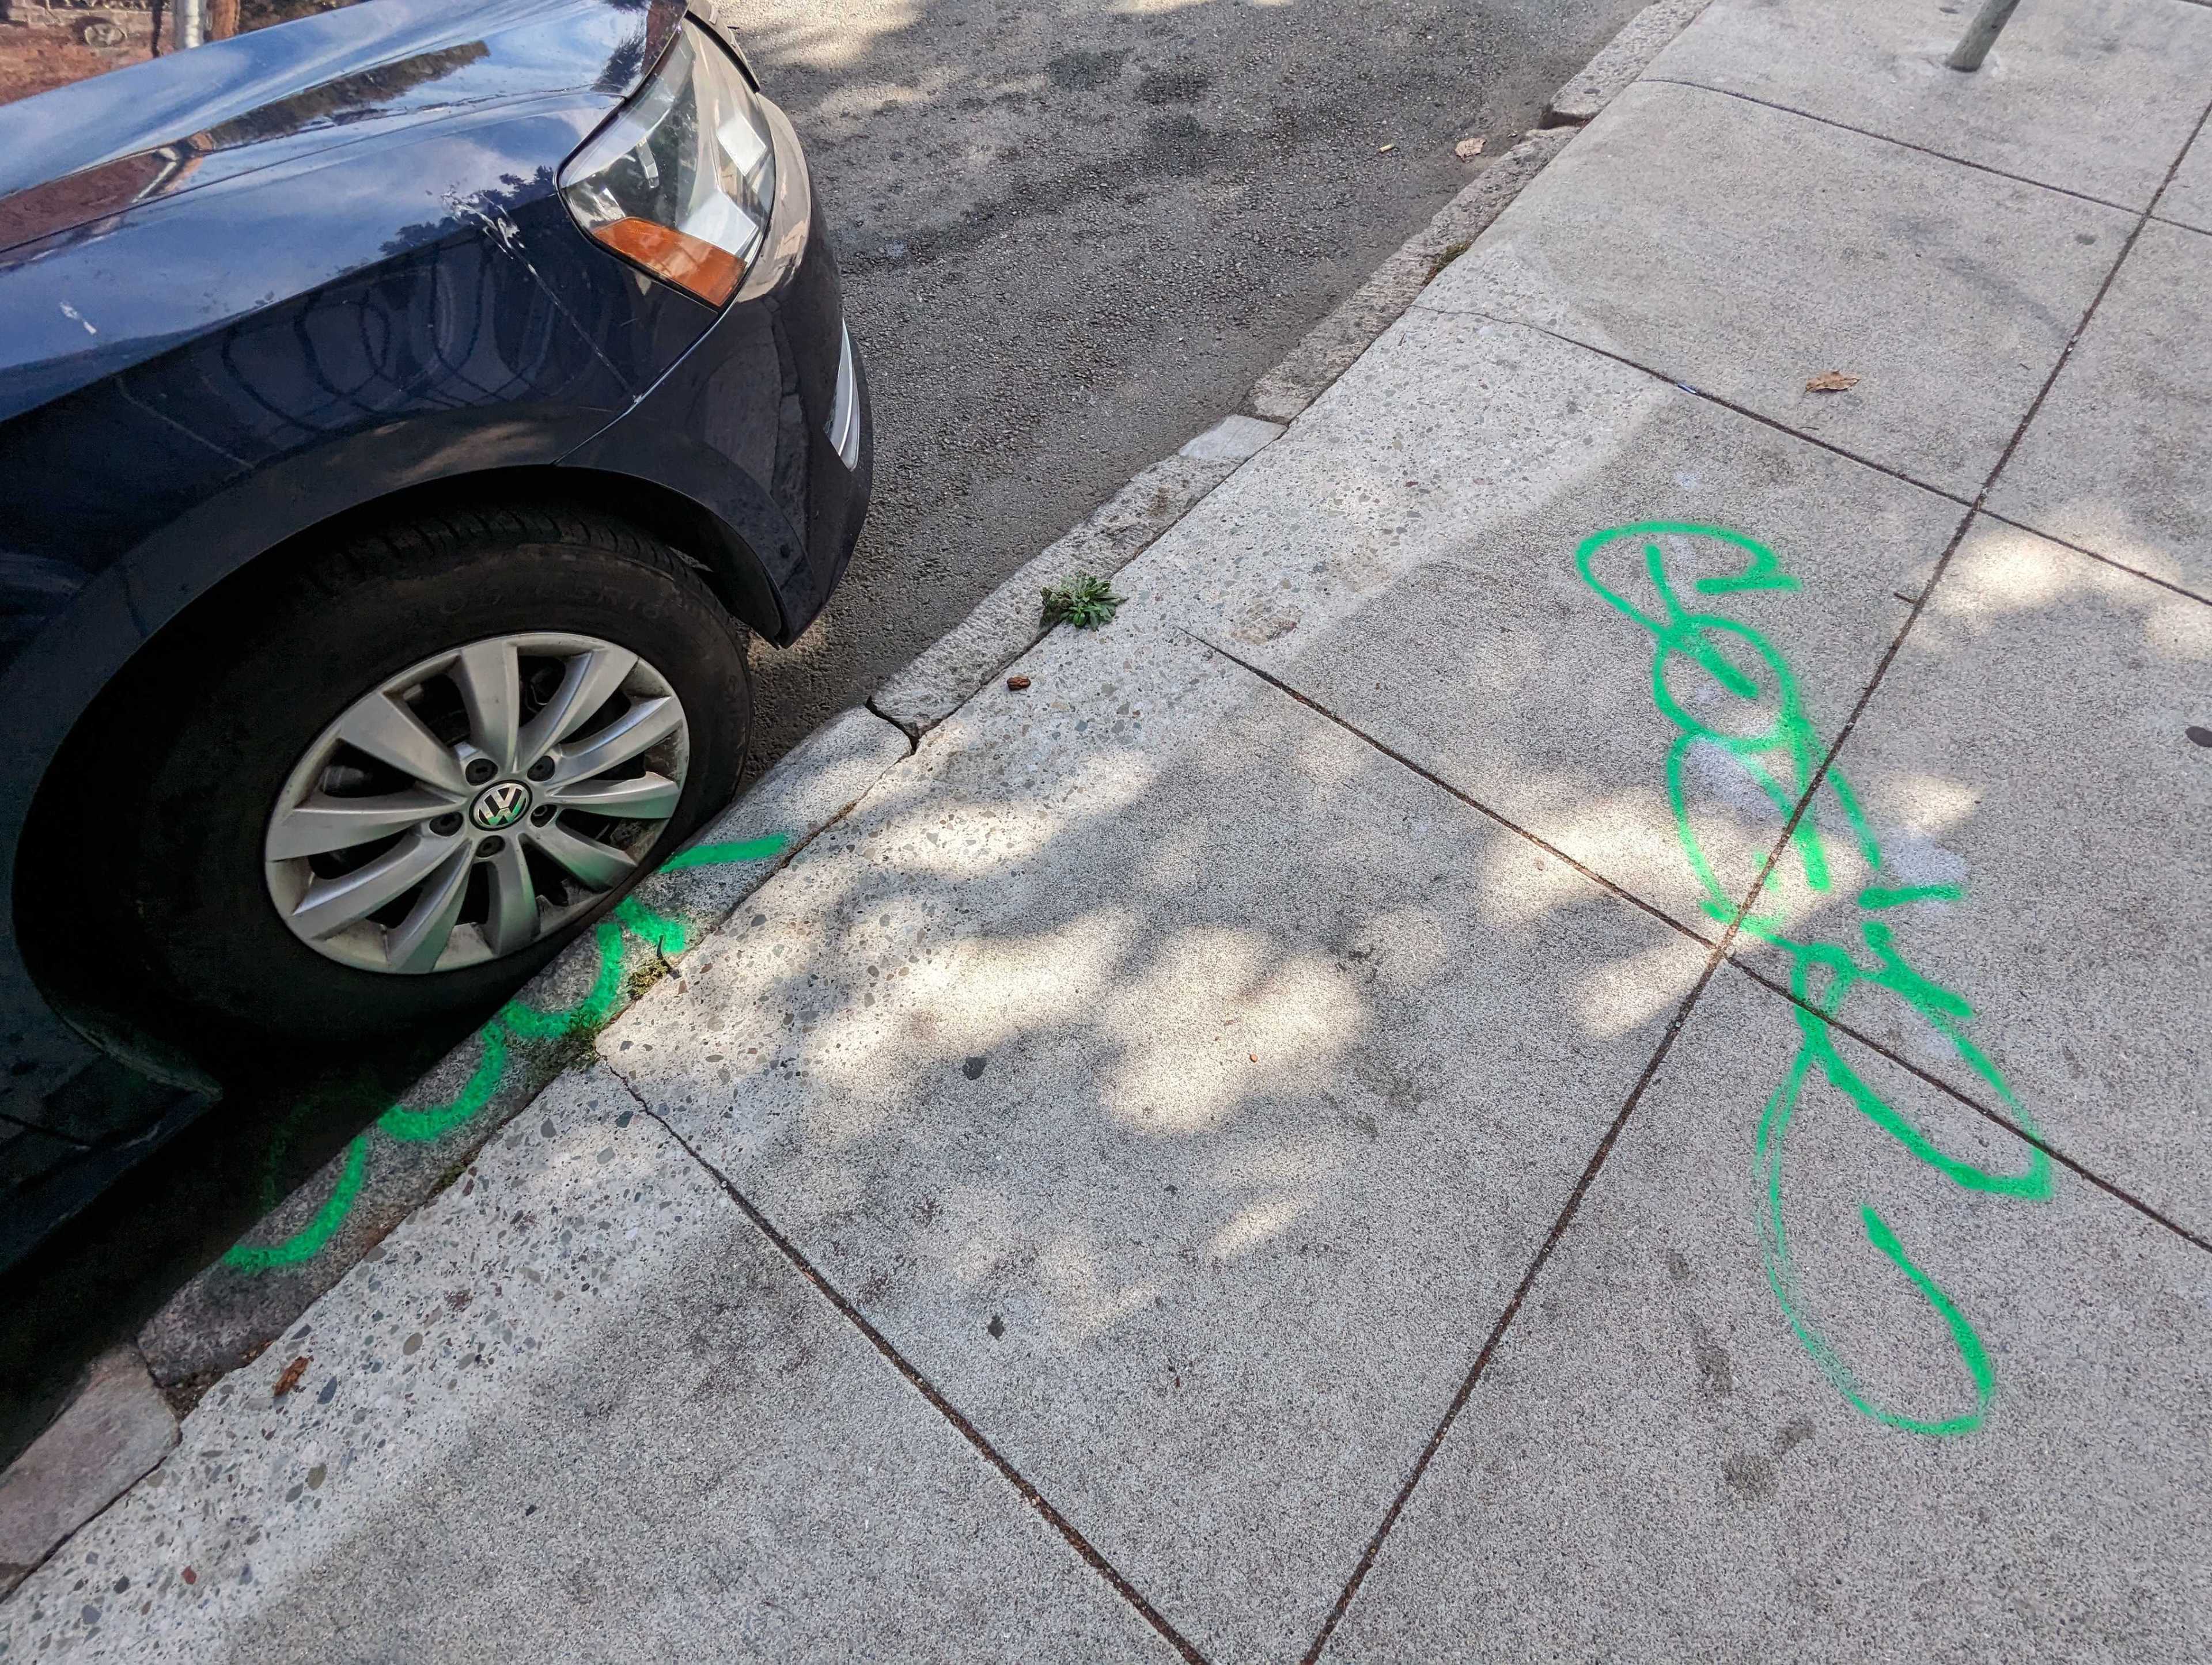 On a Langton Street sidewalk north of Folsom Street in San Francisco's South of Market neighborhood, two tags in fluorescent green spray paint mark a sidewalk and curb.